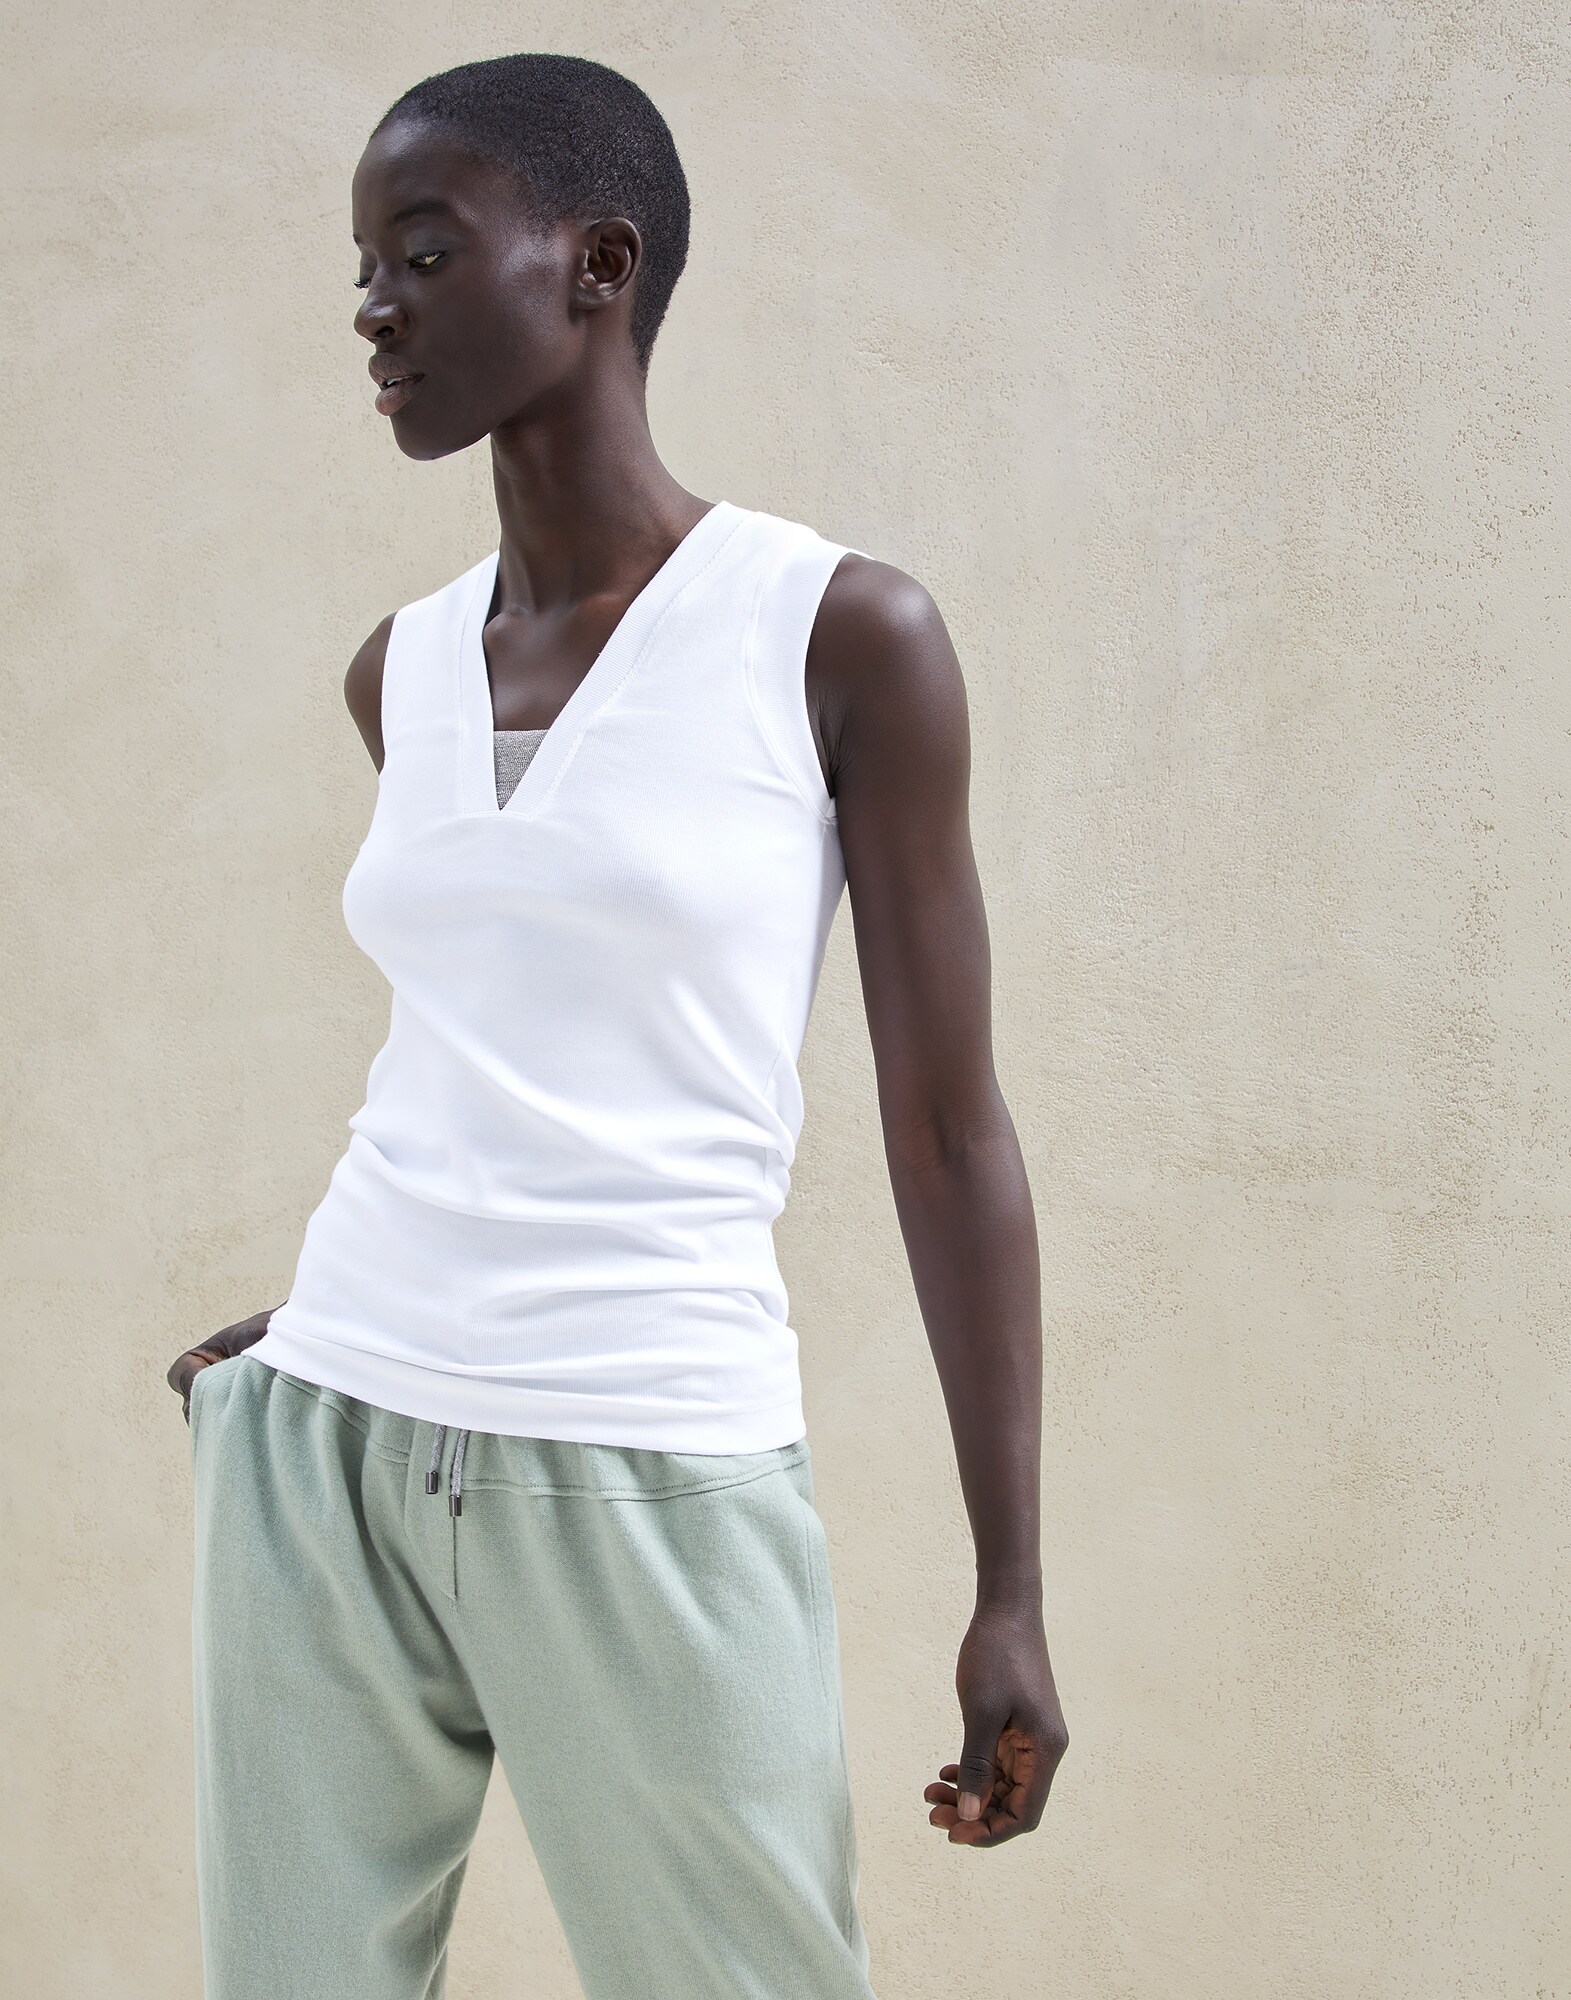 Women's tops, t-shirts and polos | Brunello Cucinelli